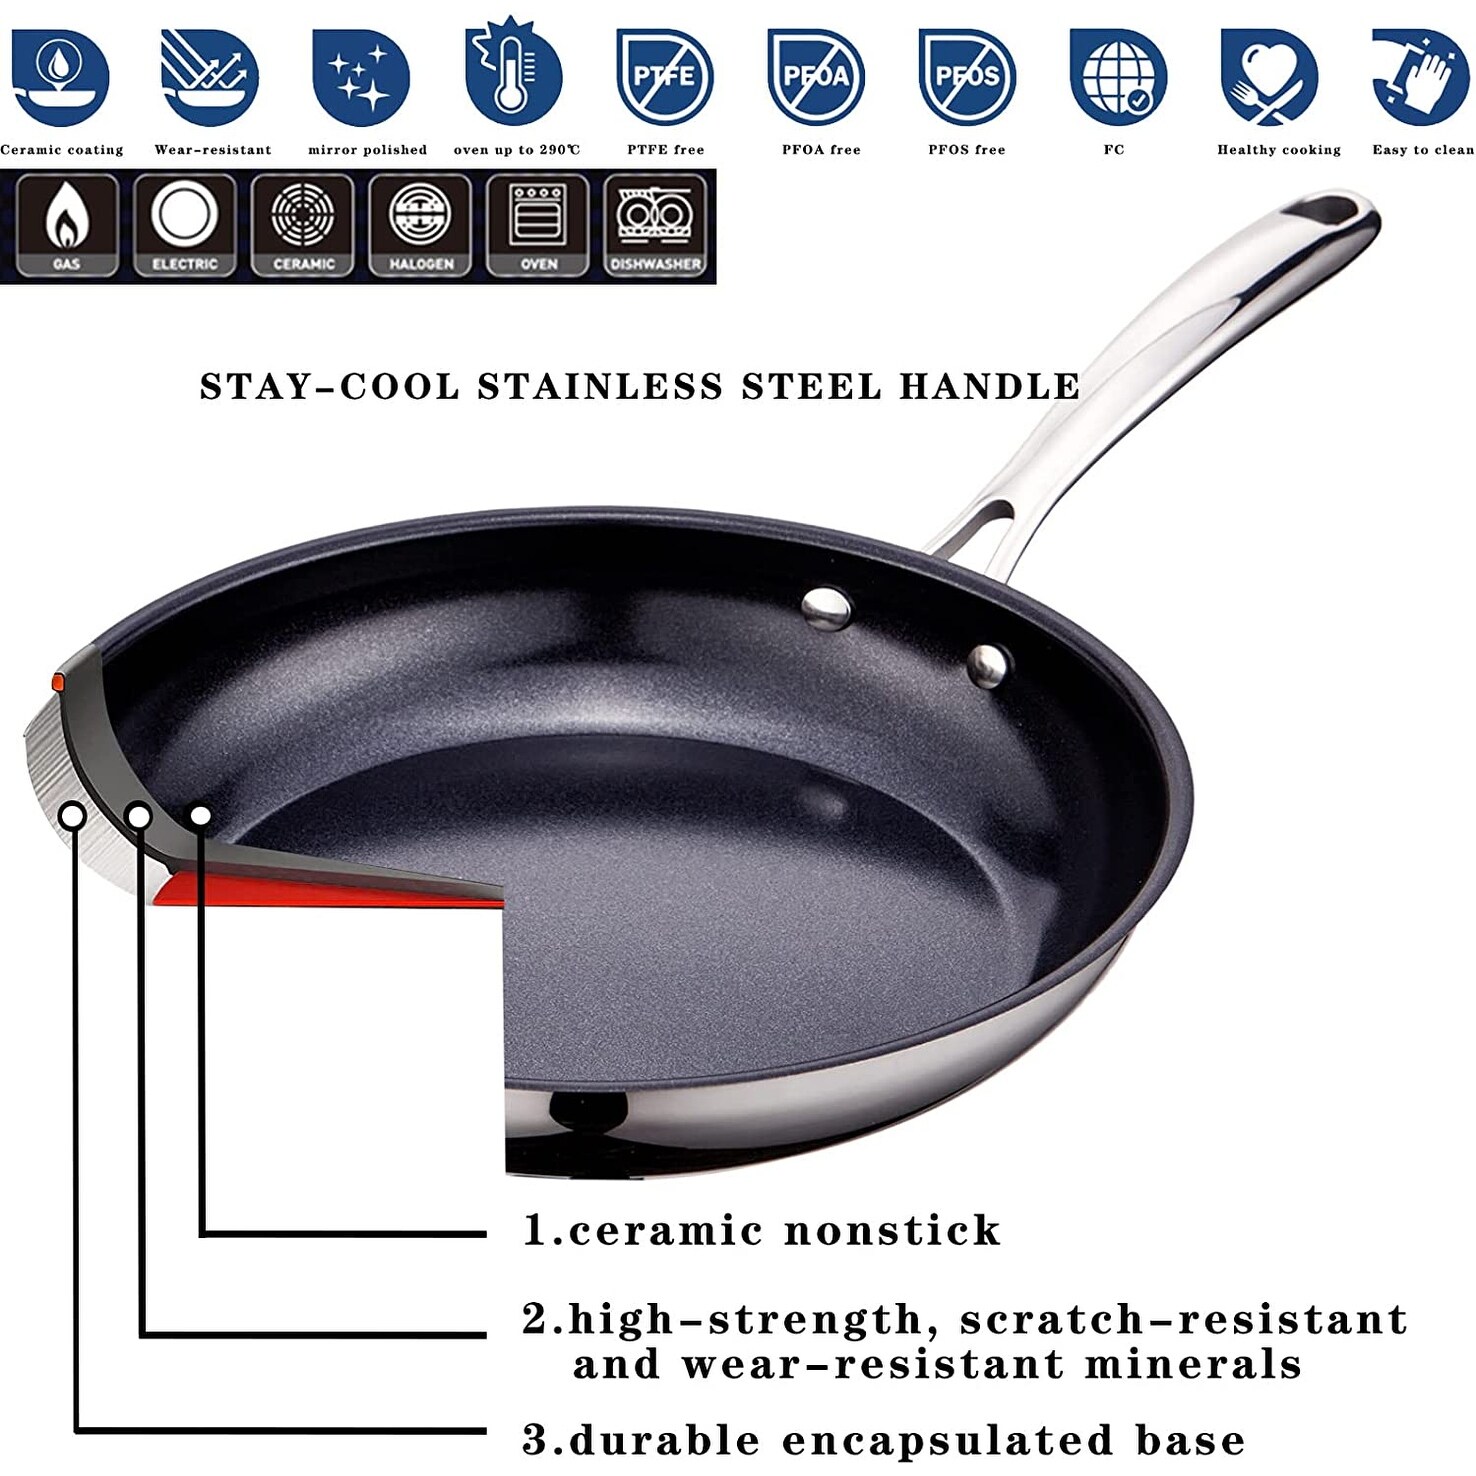 Stainless Steel Pots and Pans Set Ceramic Nonstick, 10 Pieces Professional  Home Chef Kitchen Cookware Set with Stay-Cool Handles, Mirror Polished